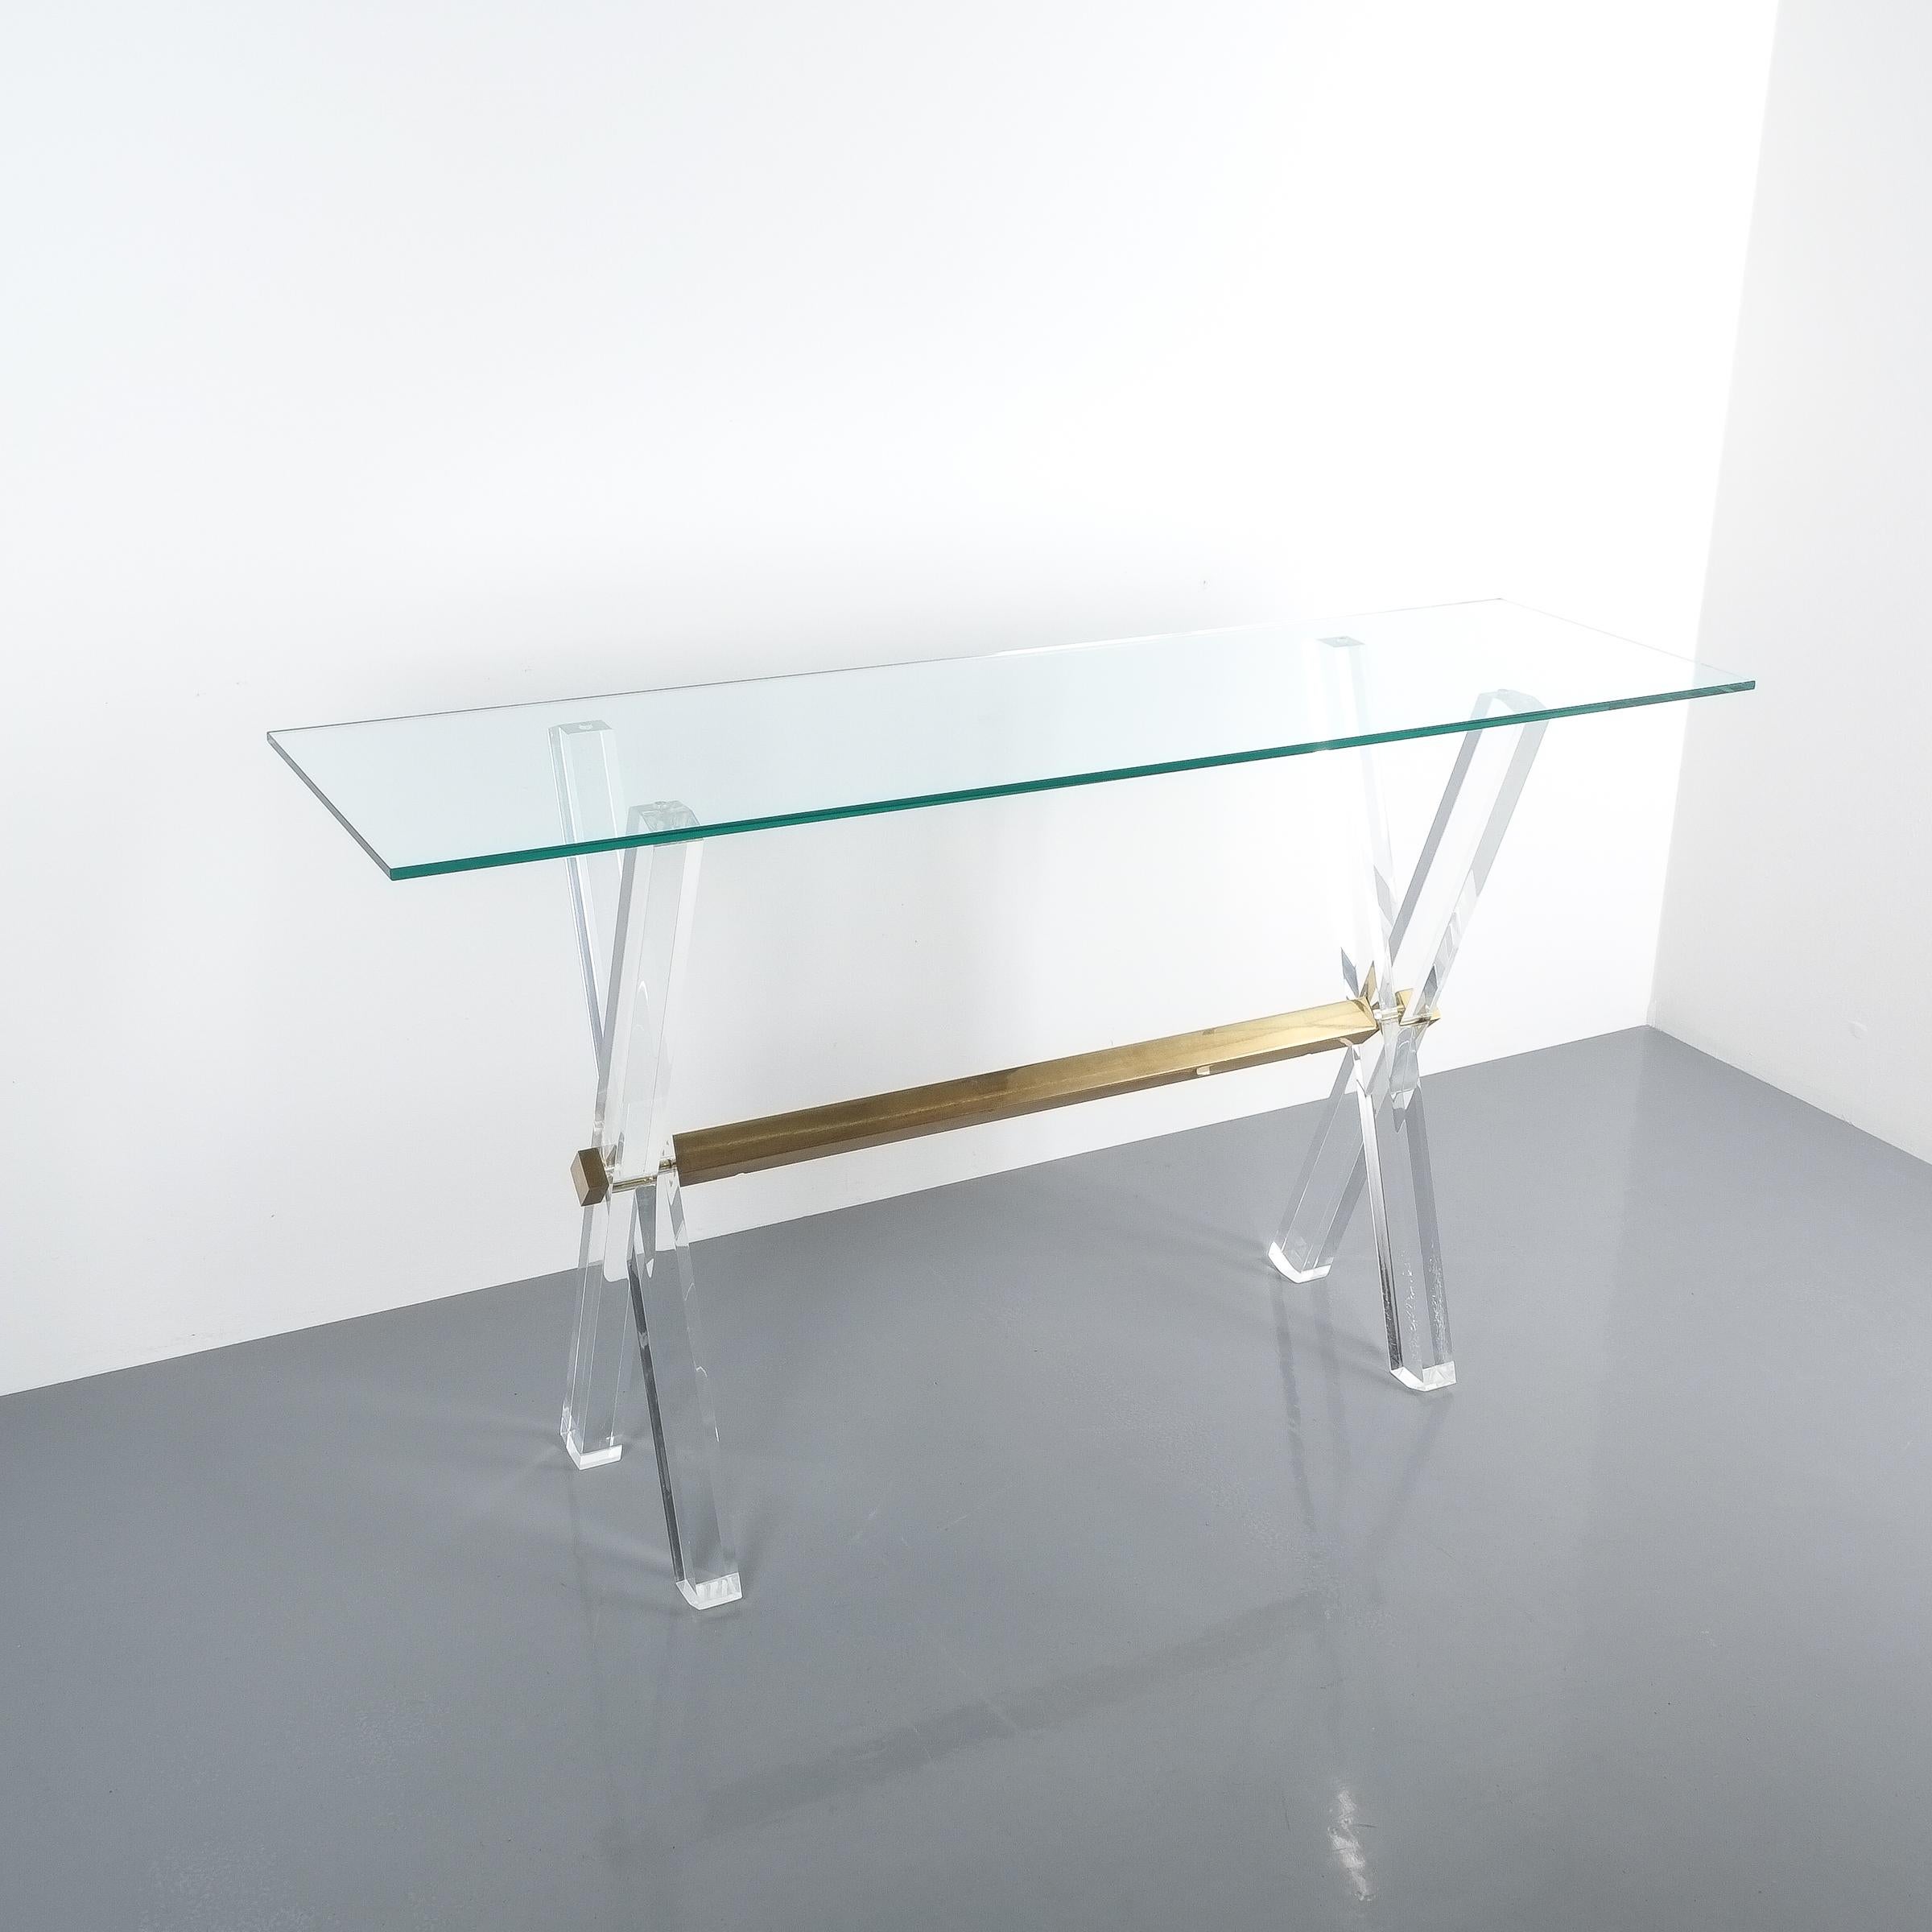 Lucite and brass X frame console table, circa 1970. Elegant console table consisting of a Lucite X frame with a horizontal polished brass beam. The glass top shows normal signs of wear with no chips present. The table is in good to excellent